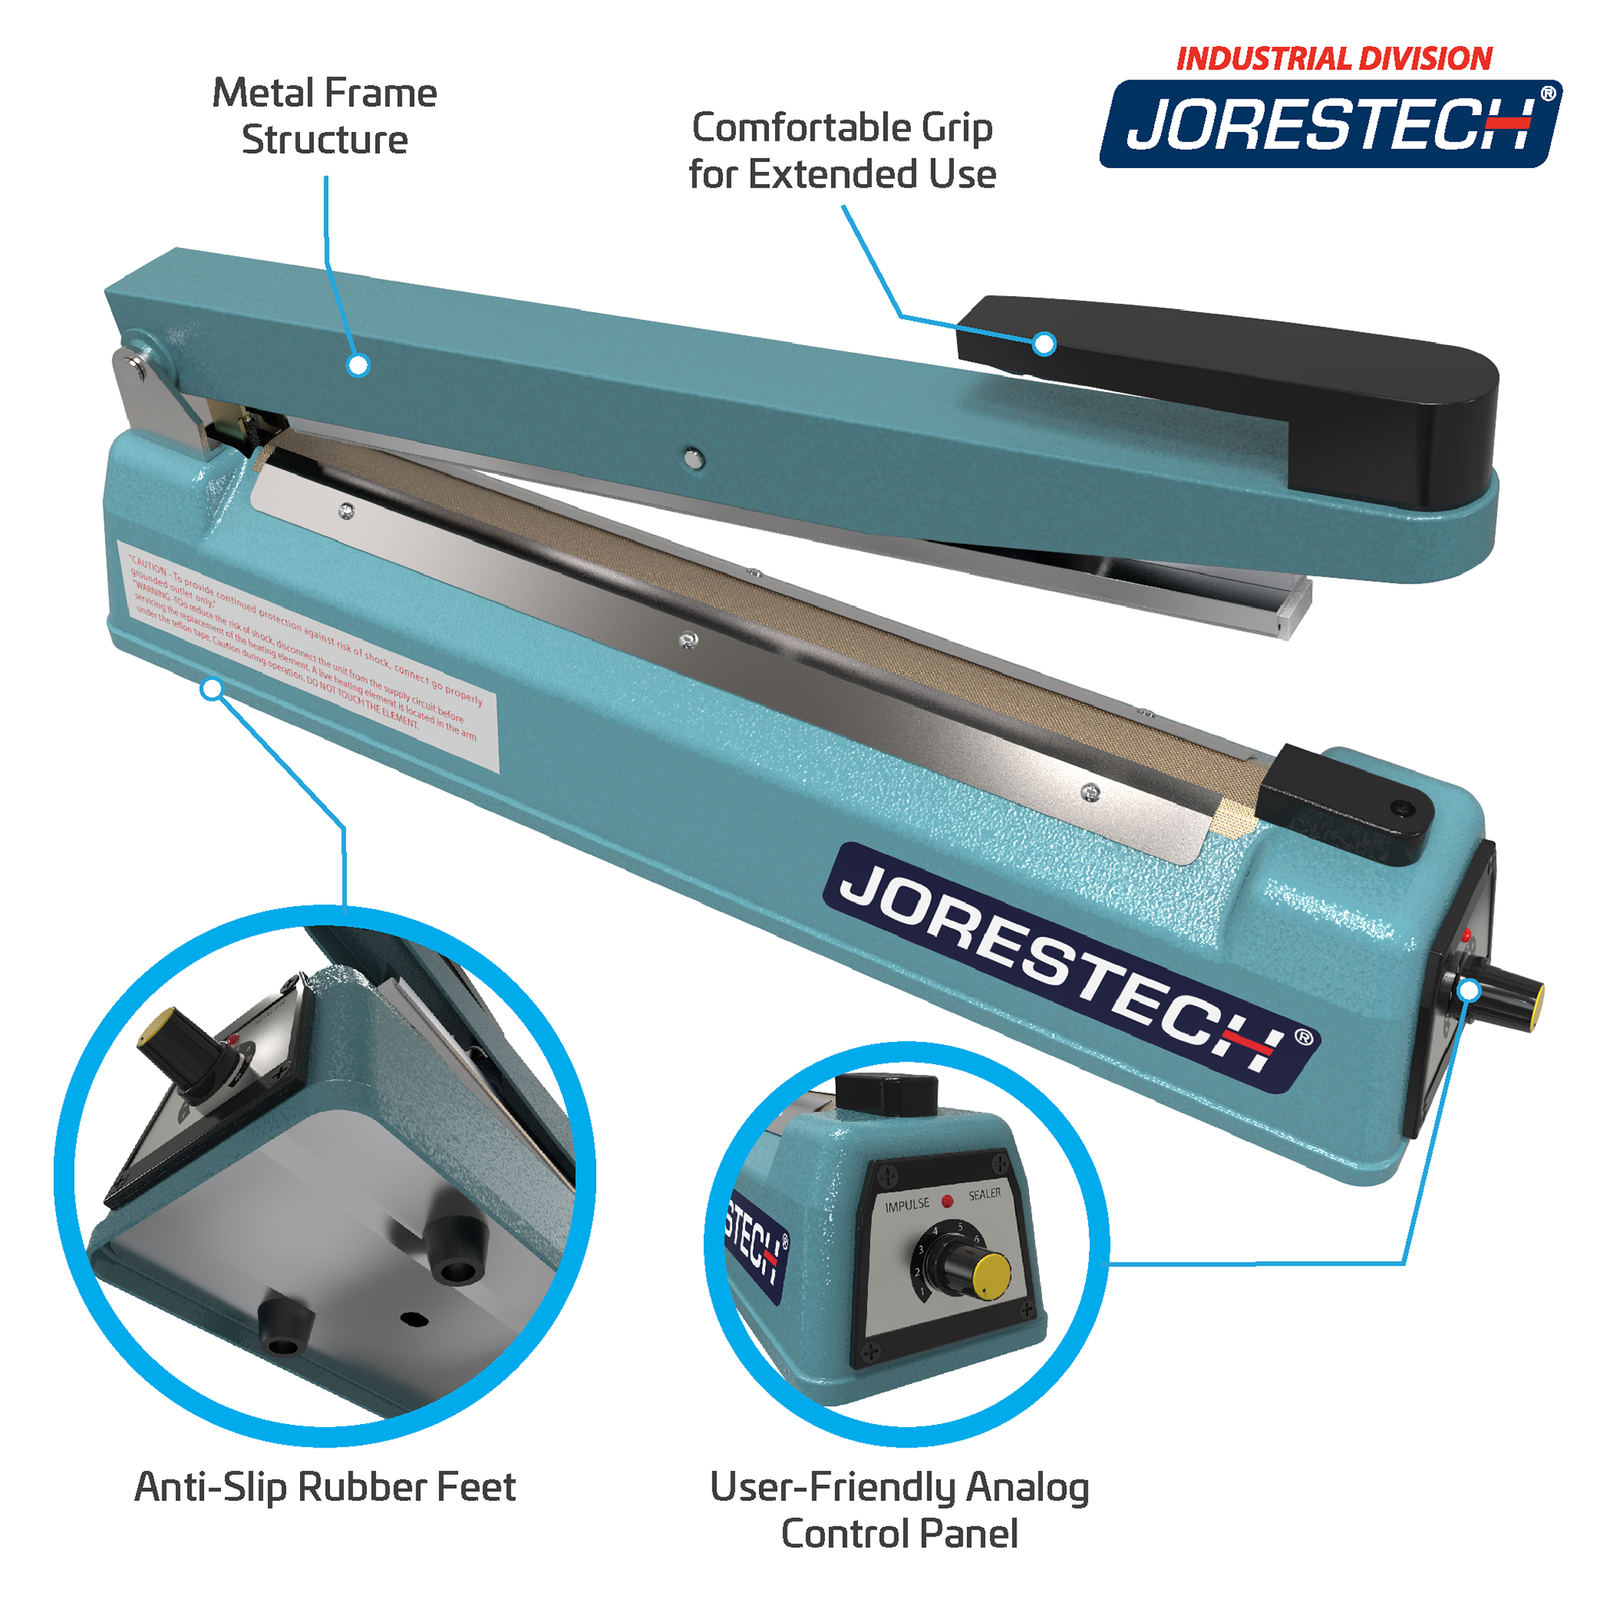 Blue manual impulse sealer over white background. Features include, Metal Frame Structure, Comfortable Grip for Extended Use, Anti-slip Rubber Feet, and User Friendly Analog Control Panel. Close-ups of rubber feet and control panel.